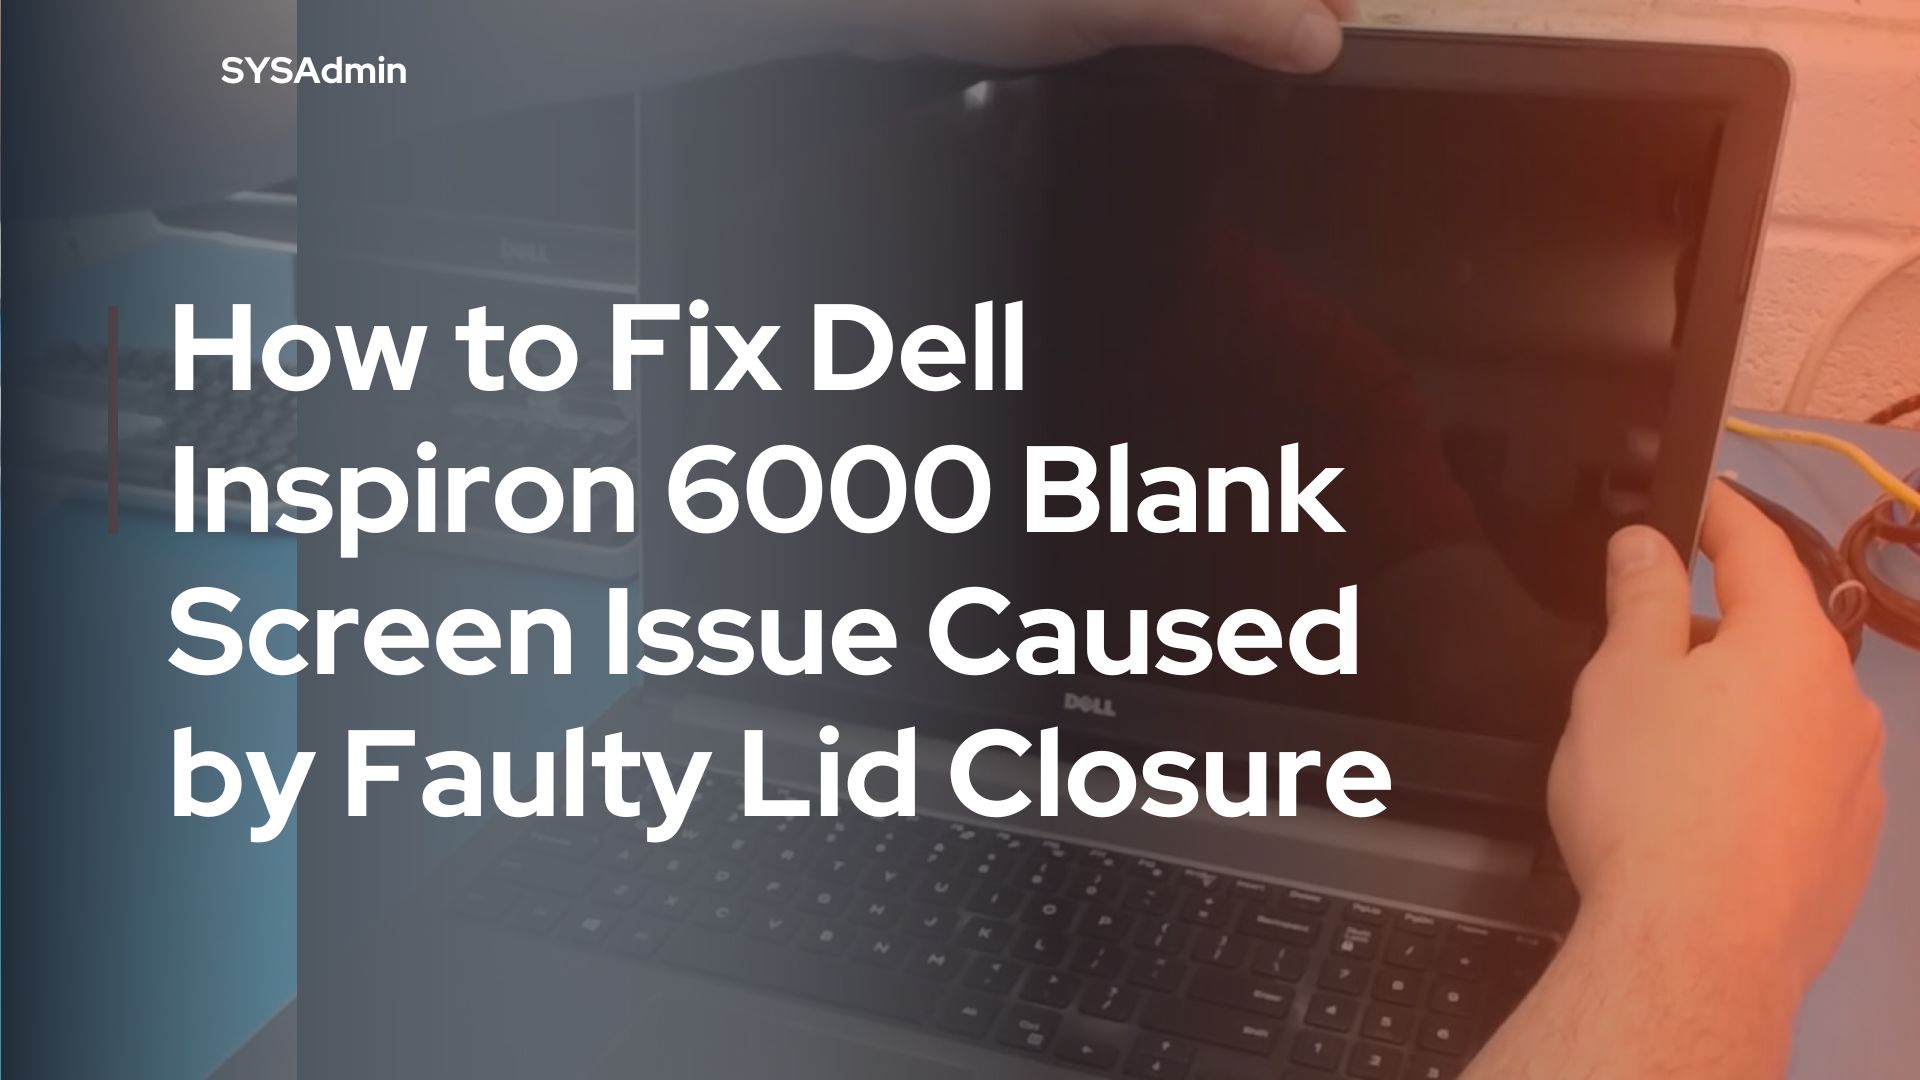 How to Fix Dell Inspiron 6000 Blank Screen Issue Caused by Faulty Lid Closure